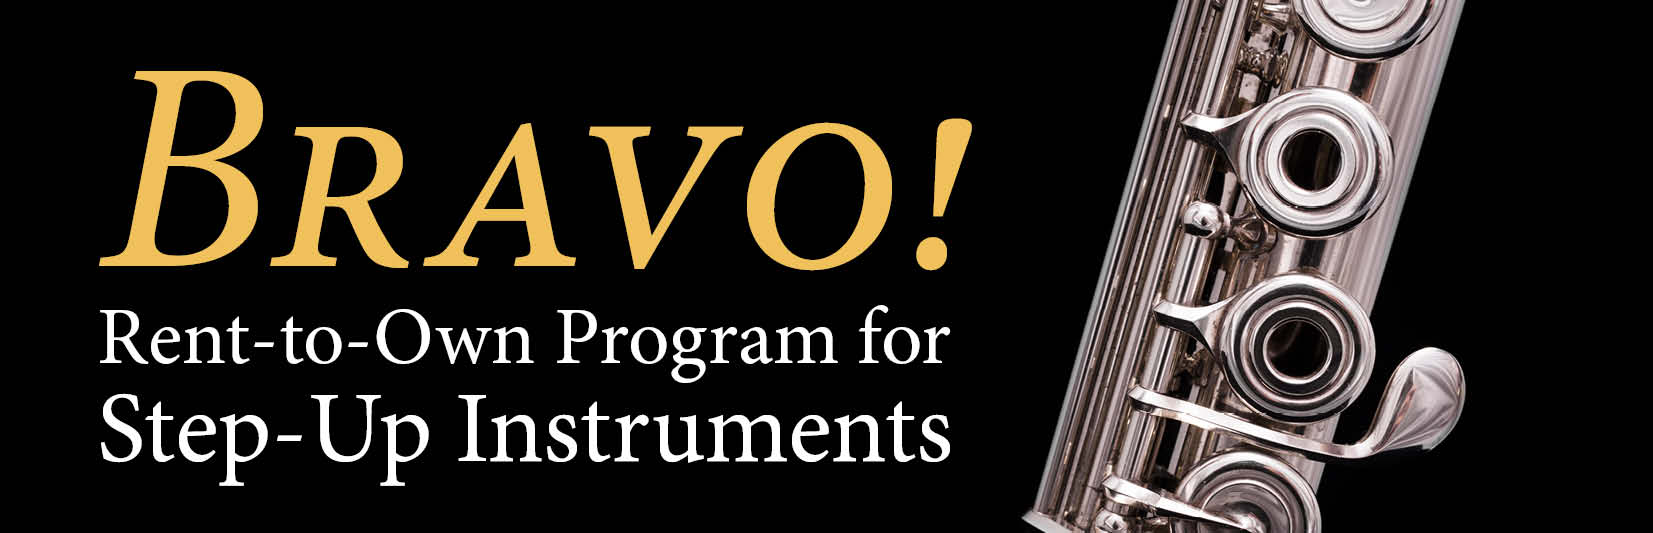 Bravo! Rent-to-Own Program for Step-Up Instruments